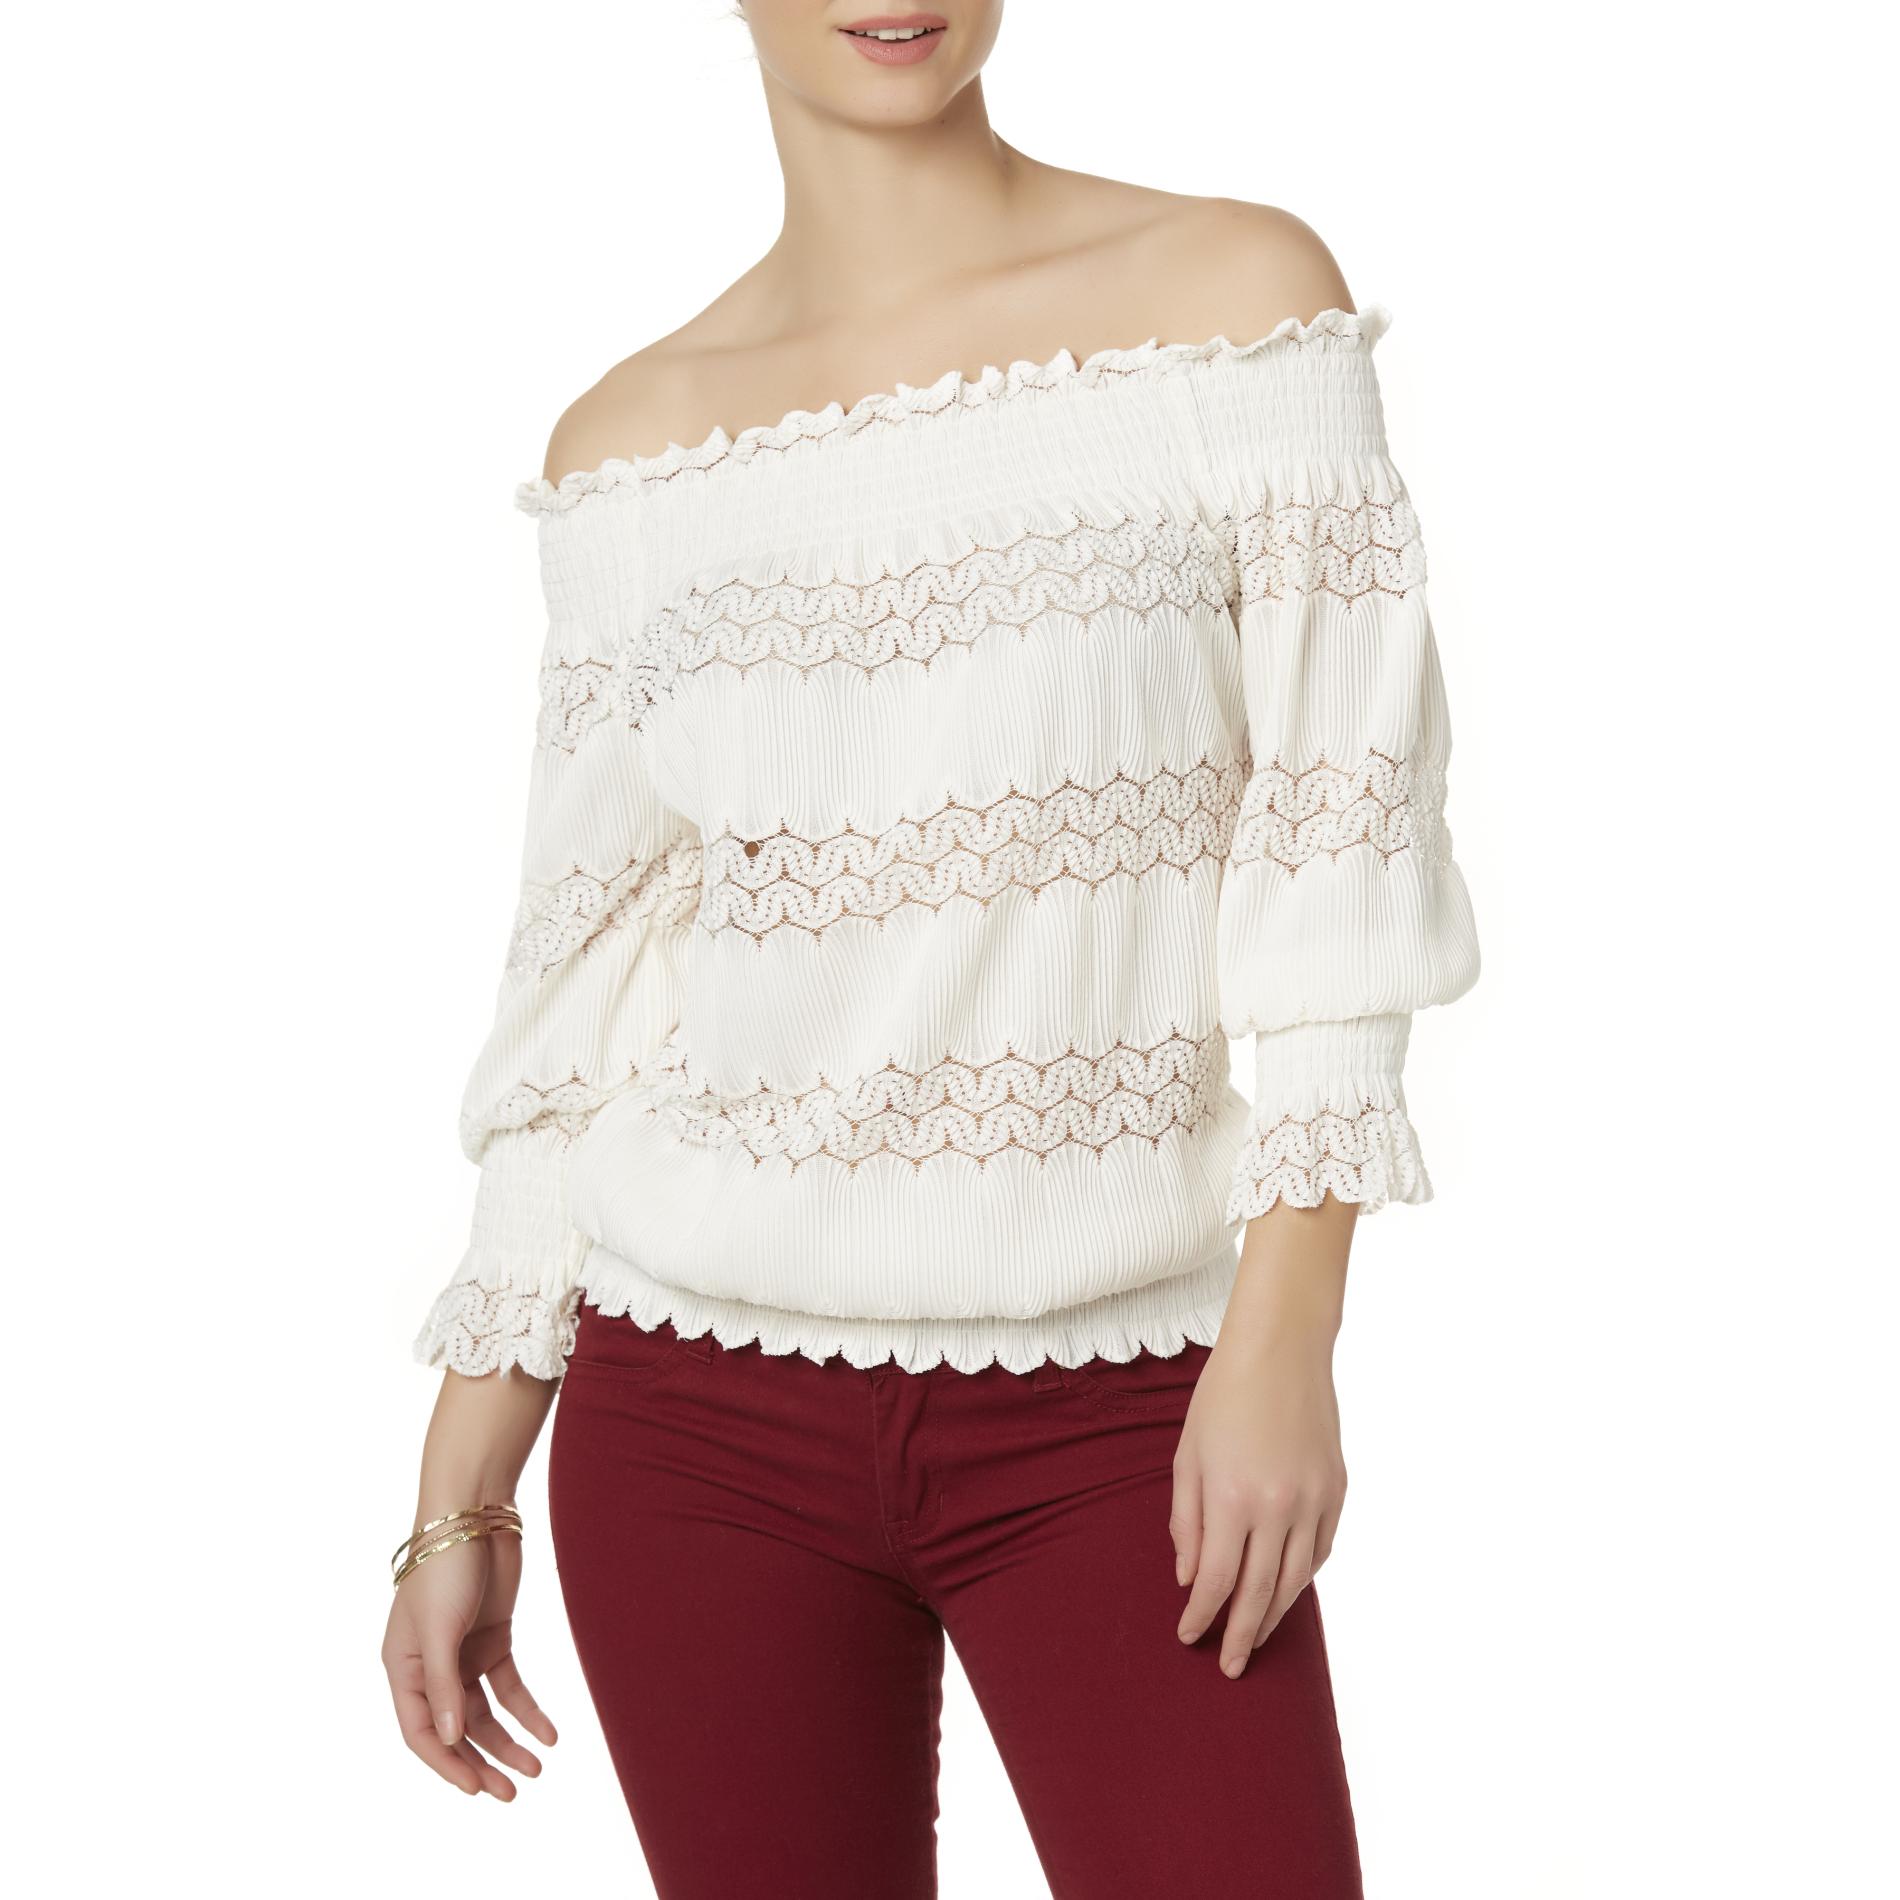 Simply Styled Petites' Off-the-Shoulder Peasant Top